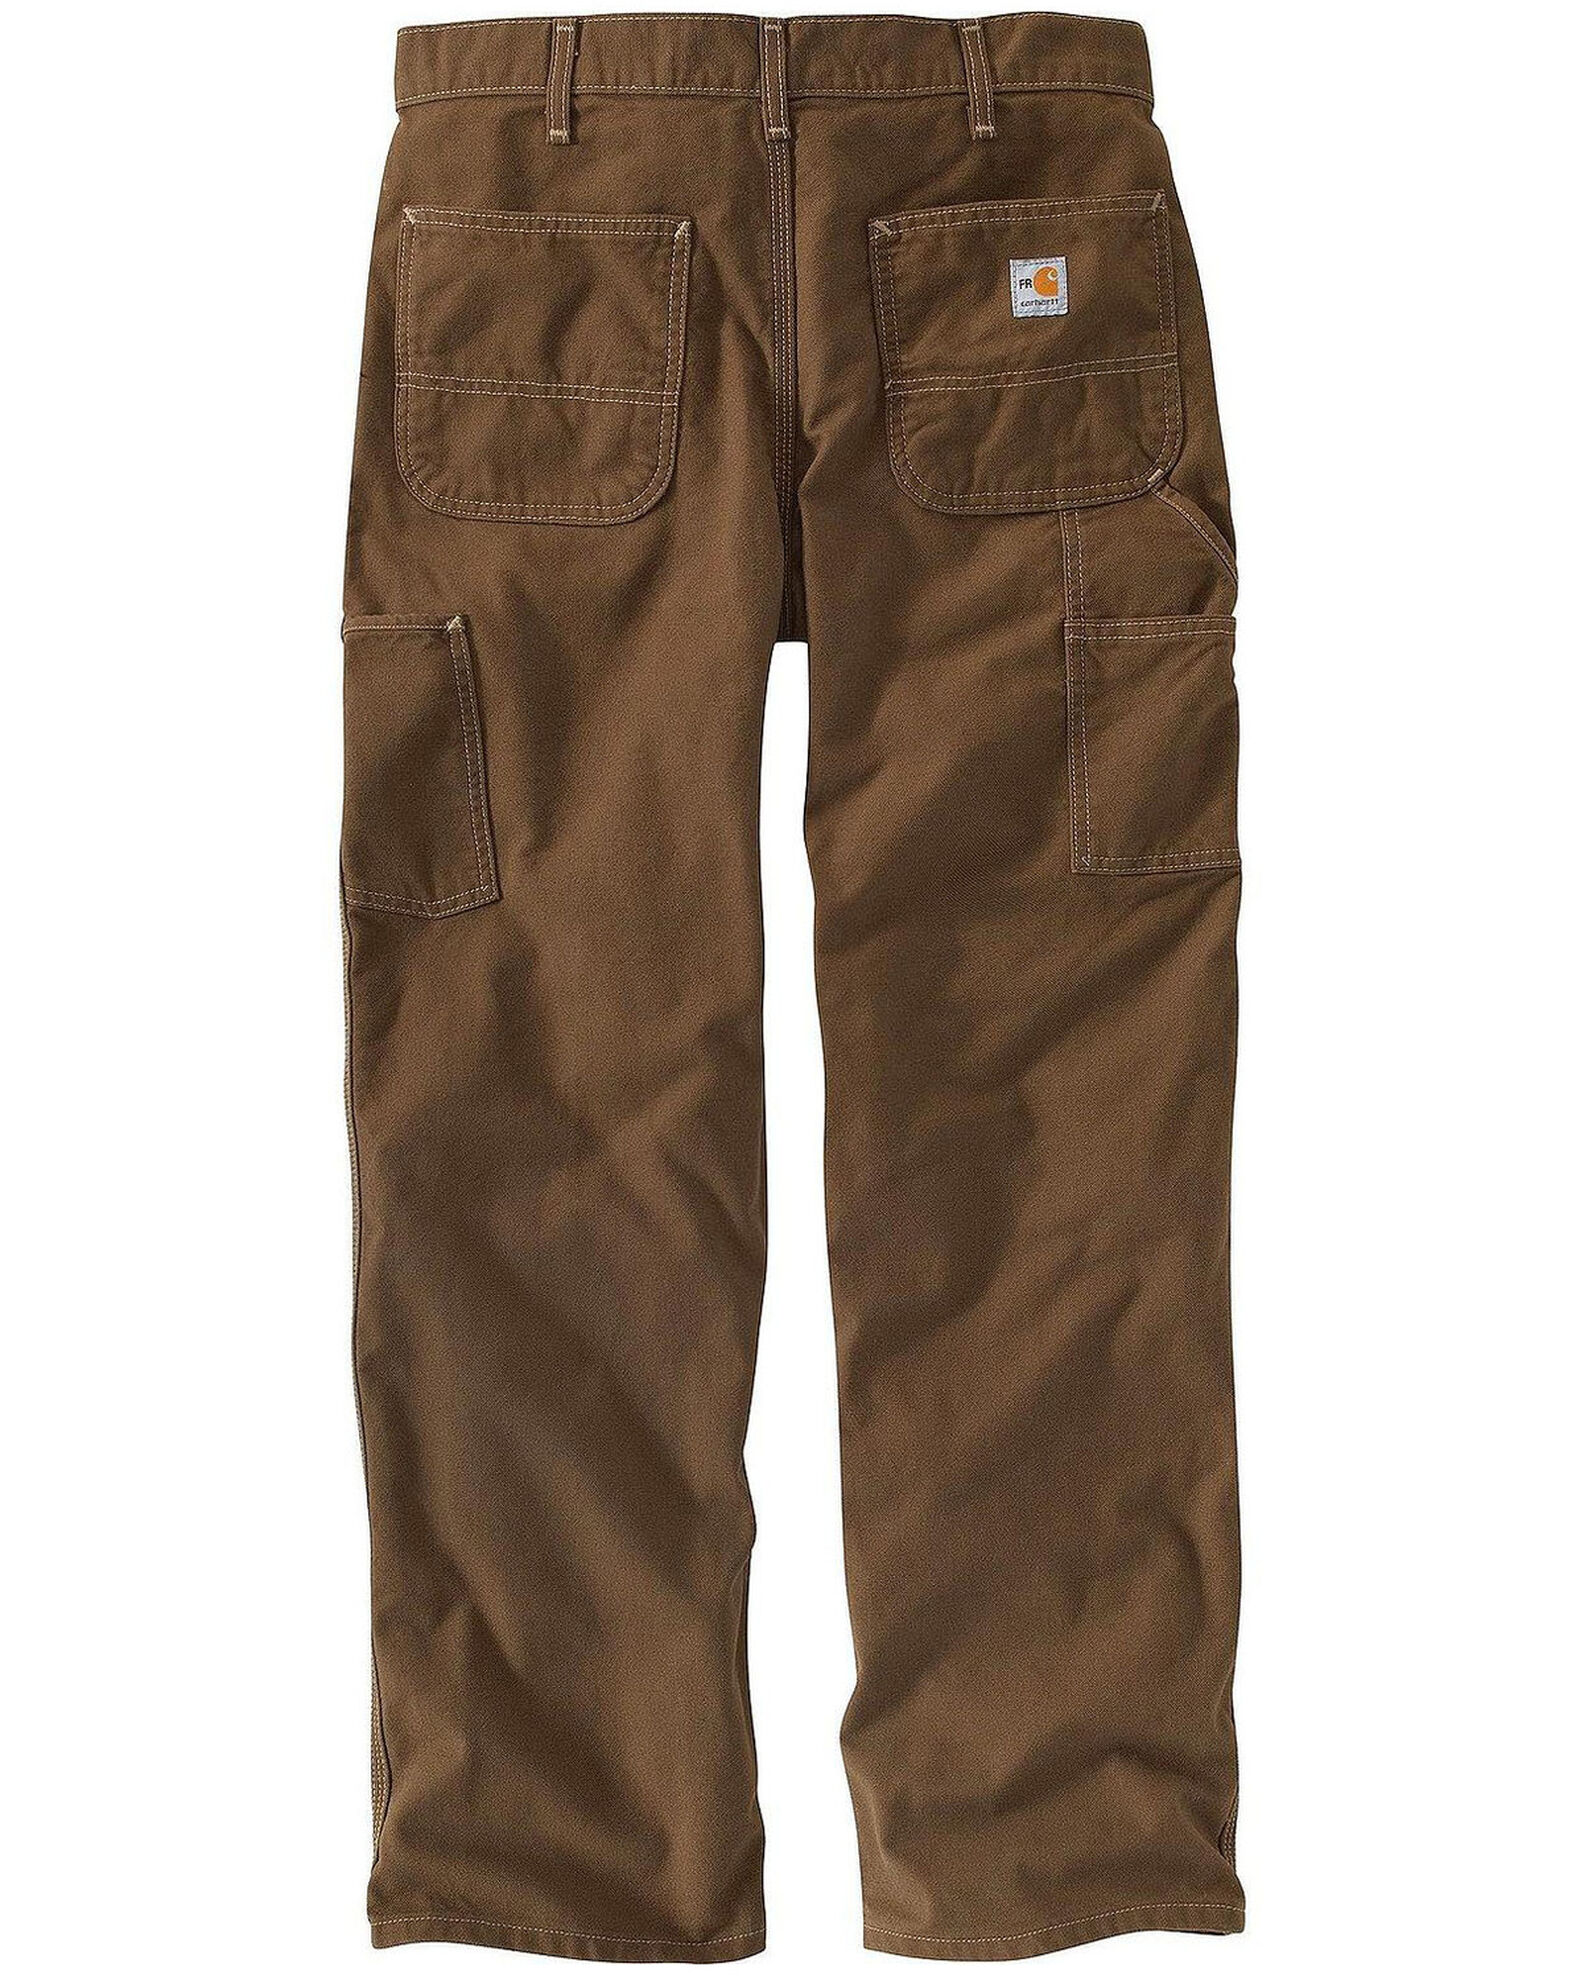 Ringback dangerous Army Carhartt Men's FR Brown Washed Duck Dungaree Work Pants - Big | Boot Barn